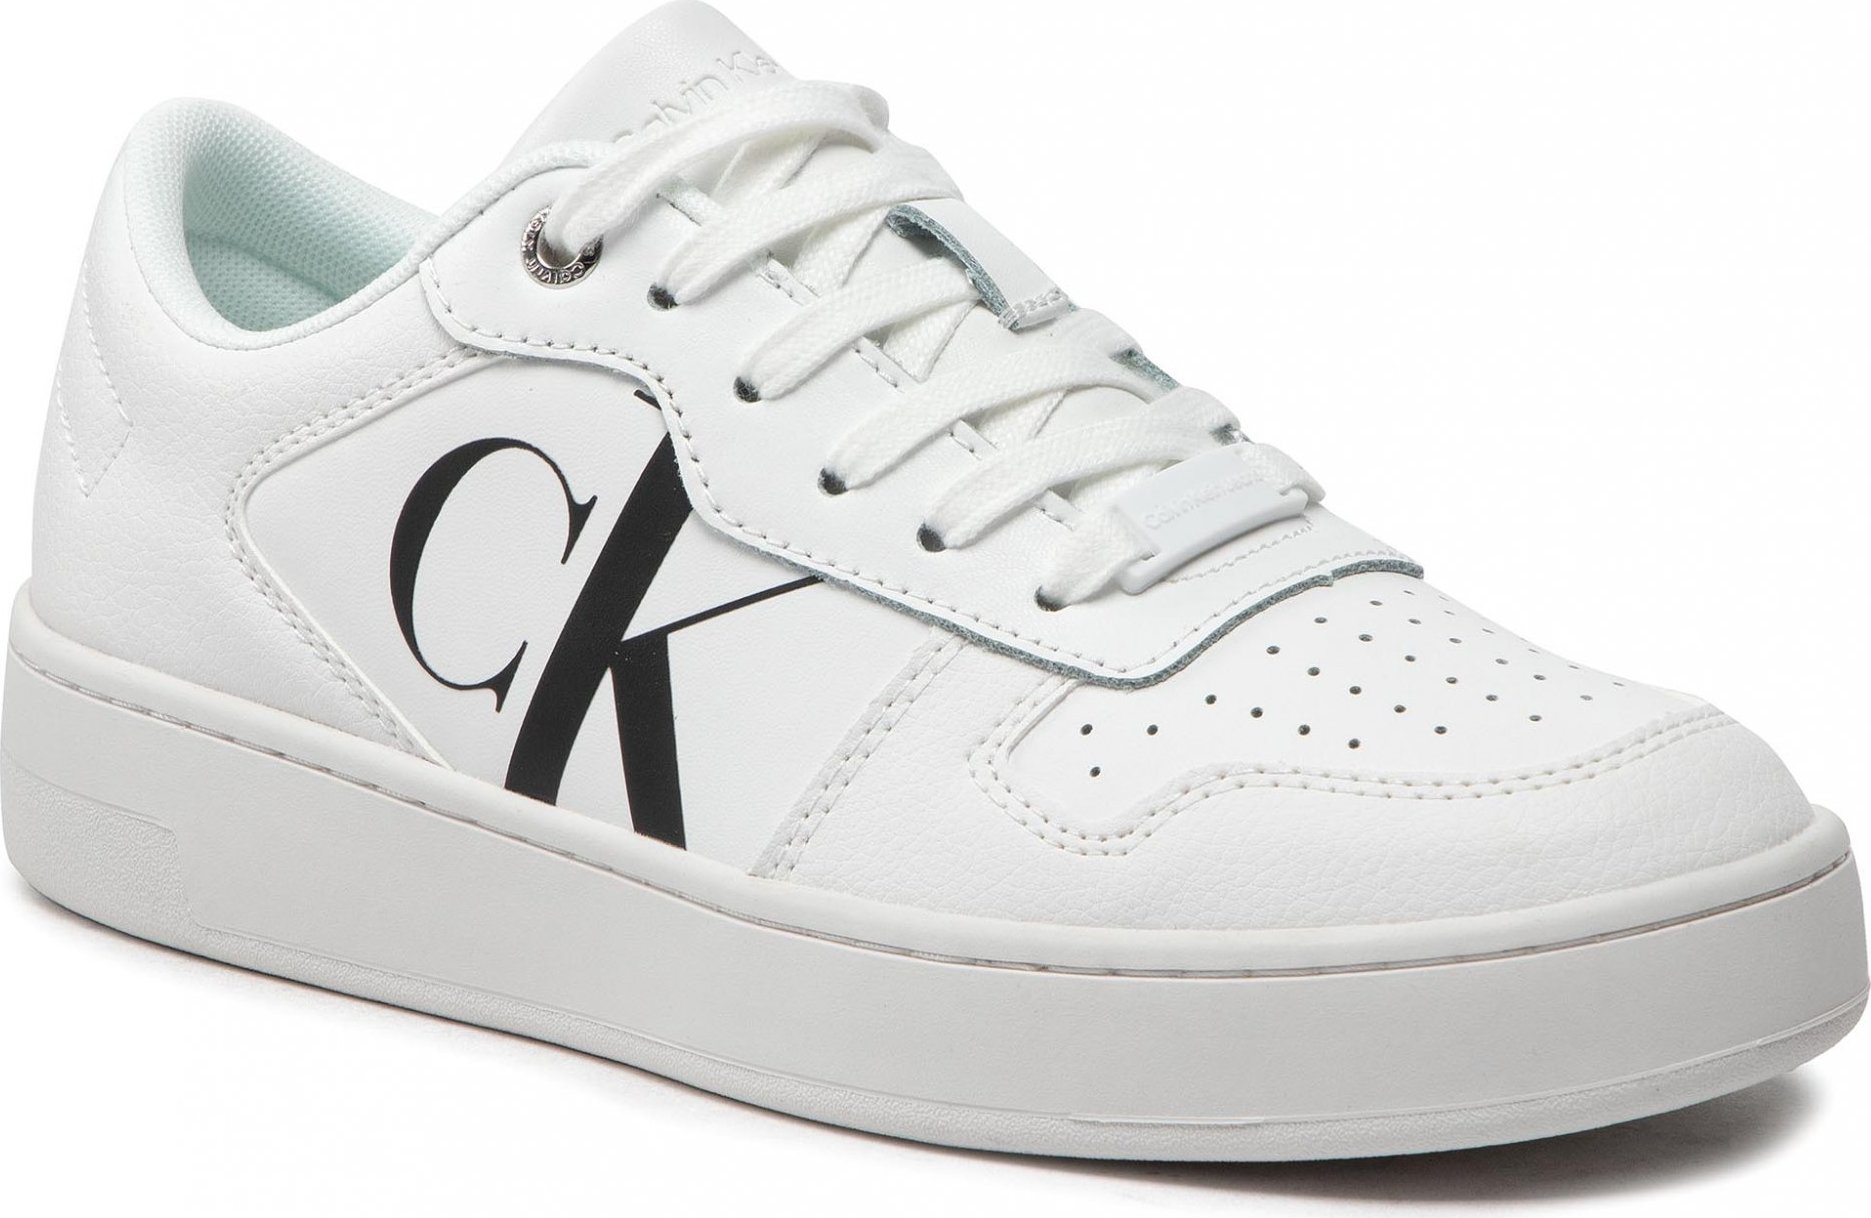 Calvin Klein Jeans Cupsole Laceup Basket Low Lth YW0YW00692